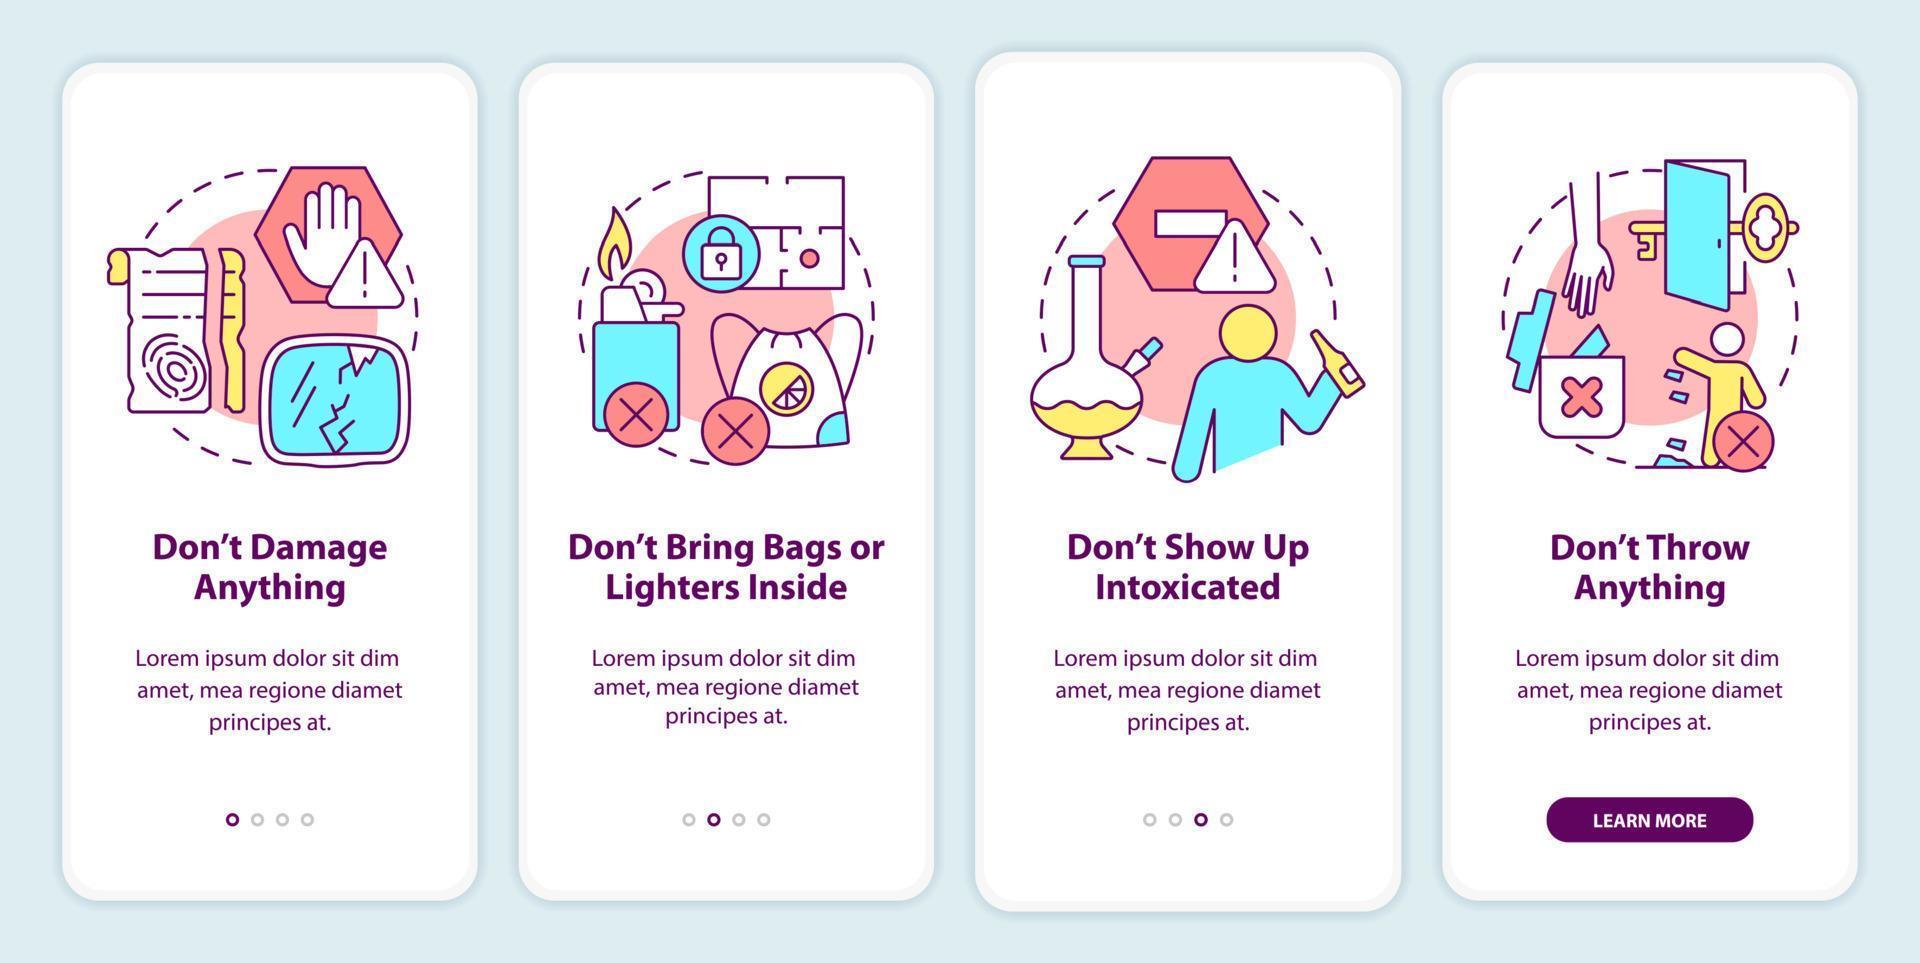 Escape room rules onboarding mobile app screen. Avoid damage anything walkthrough 4 steps graphic instructions pages with linear concepts. UI, UX, GUI template. vector